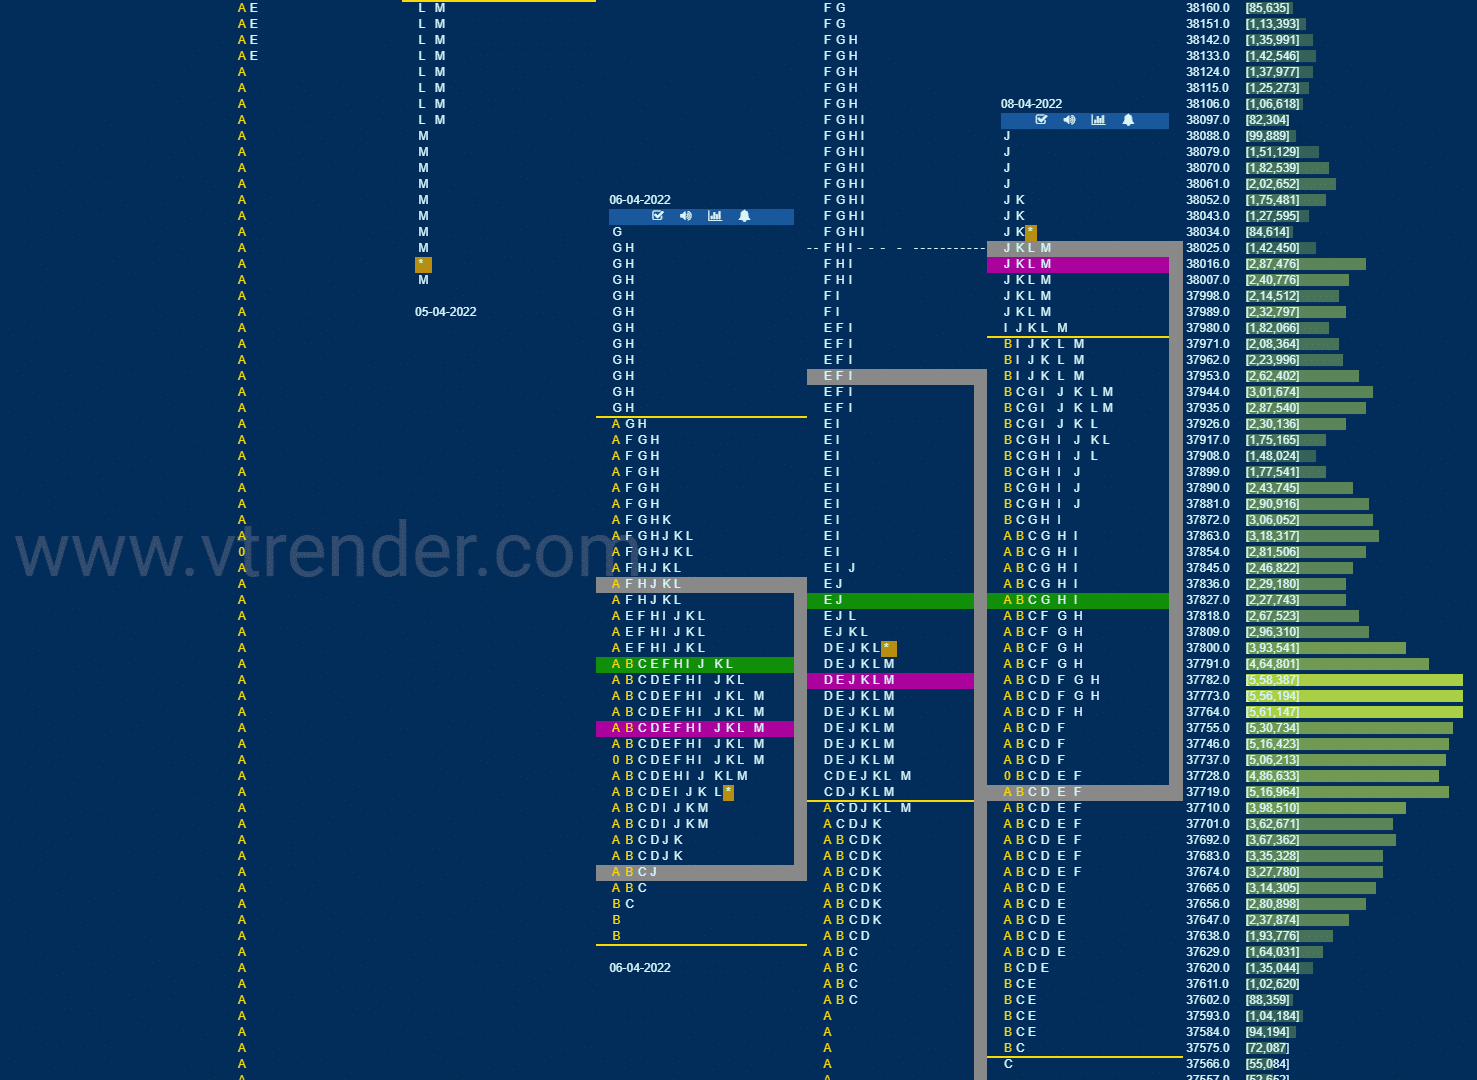 Bnf 5 Market Profile Analysis Dated 08Th April 2022 Banknifty Futures, Charts, Day Trading, Intraday Trading, Intraday Trading Strategies, Market Profile, Market Profile Trading Strategies, Nifty Futures, Order Flow Analysis, Support And Resistance, Technical Analysis, Trading Strategies, Volume Profile Trading